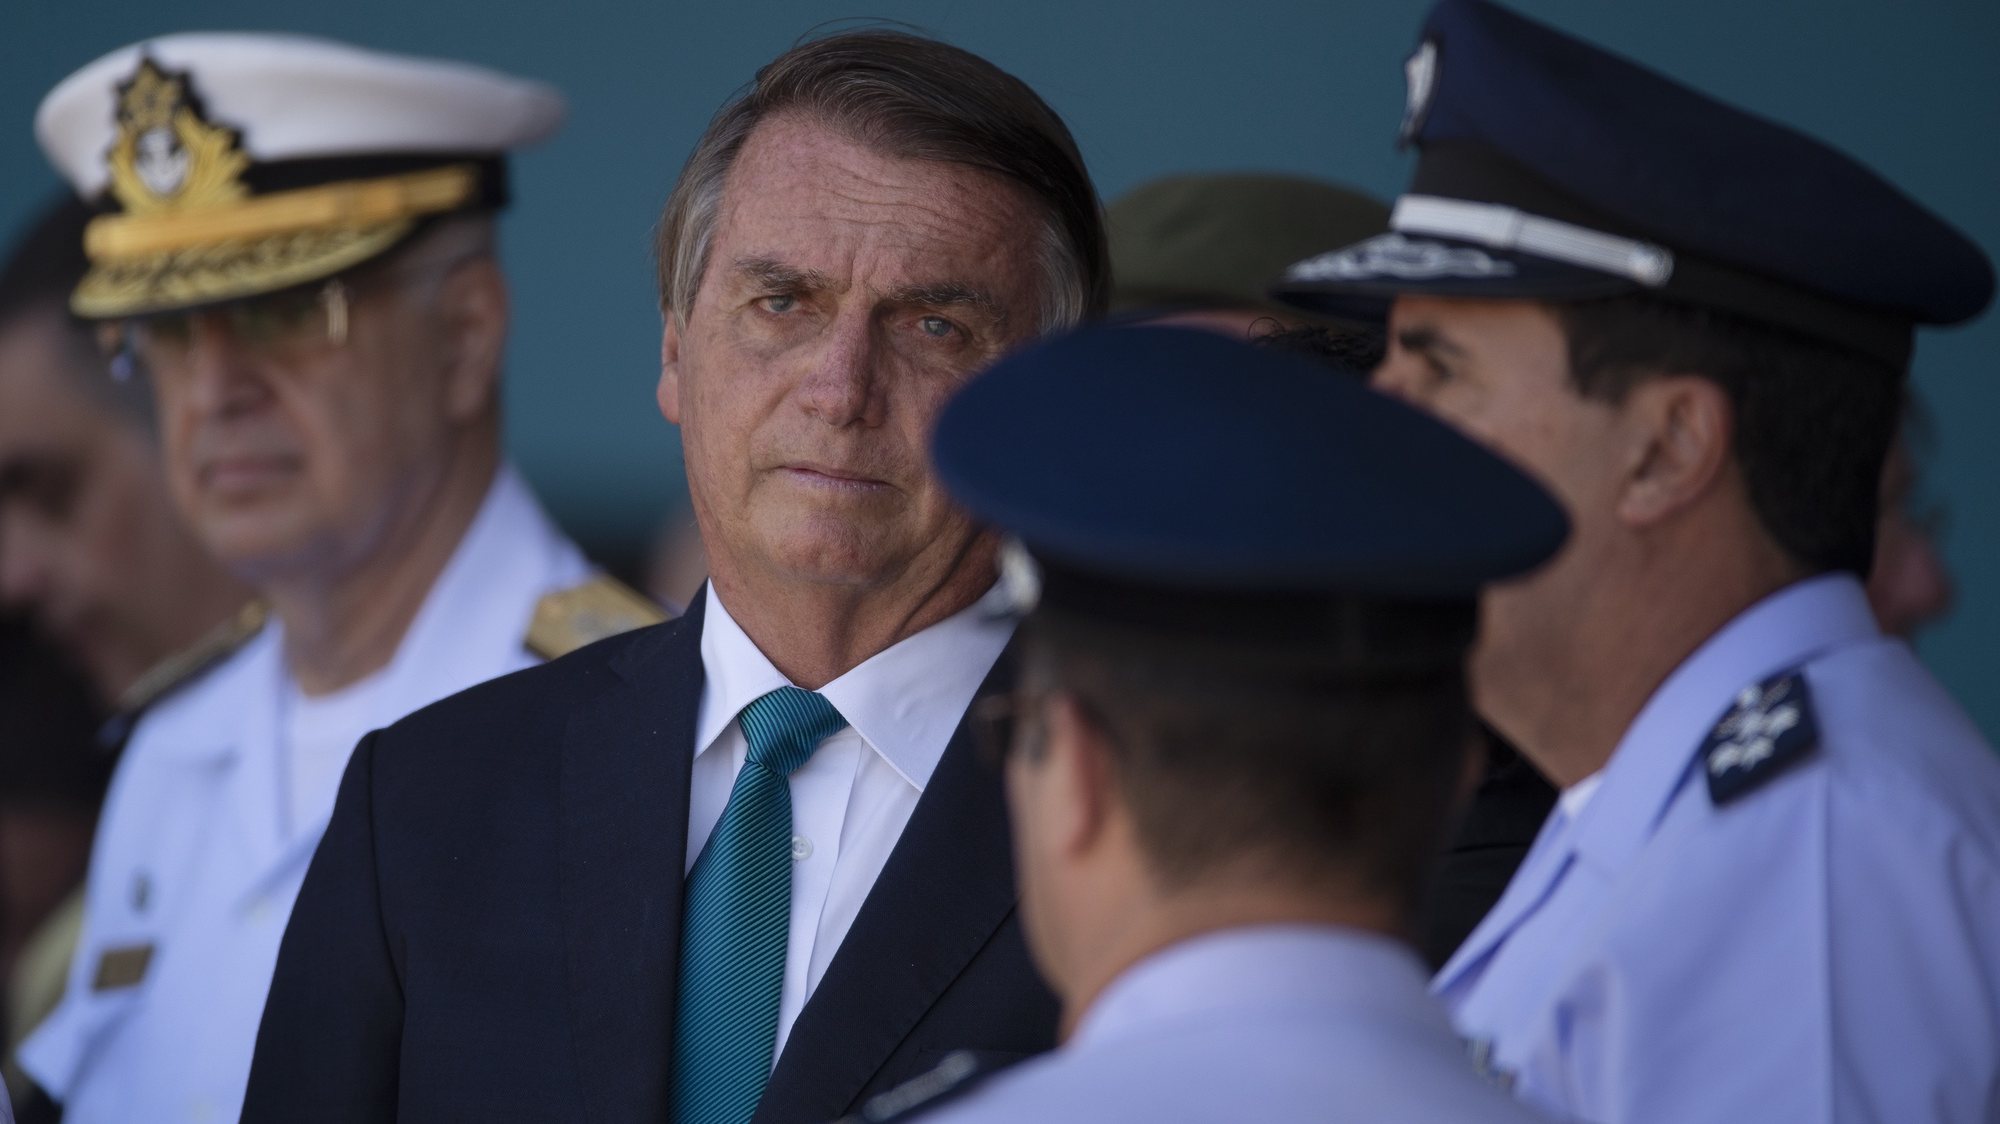 epa09815593 The President of Brazil, Jair Bolsonaro (C), takes part in the reception of Brazilian and other citizens who resided in Ukraine and were rescued in Operation Repatriation, at the Military Air Base of Brasilia, Brazil, 10 March 2022. The President of Brazil, Jair Bolsonaro, received this 10 March a group of 68 people who lived in Ukraine and managed to escape the war and reach Poland, where they were picked up this week by two planes of the Brazilian Air Force (FAB). They are 42 Brazilians, 20 Ukrainians, five Argentines and one Colombian, along with eight dogs and two cats.  EPA/JoÃ©dson Alves